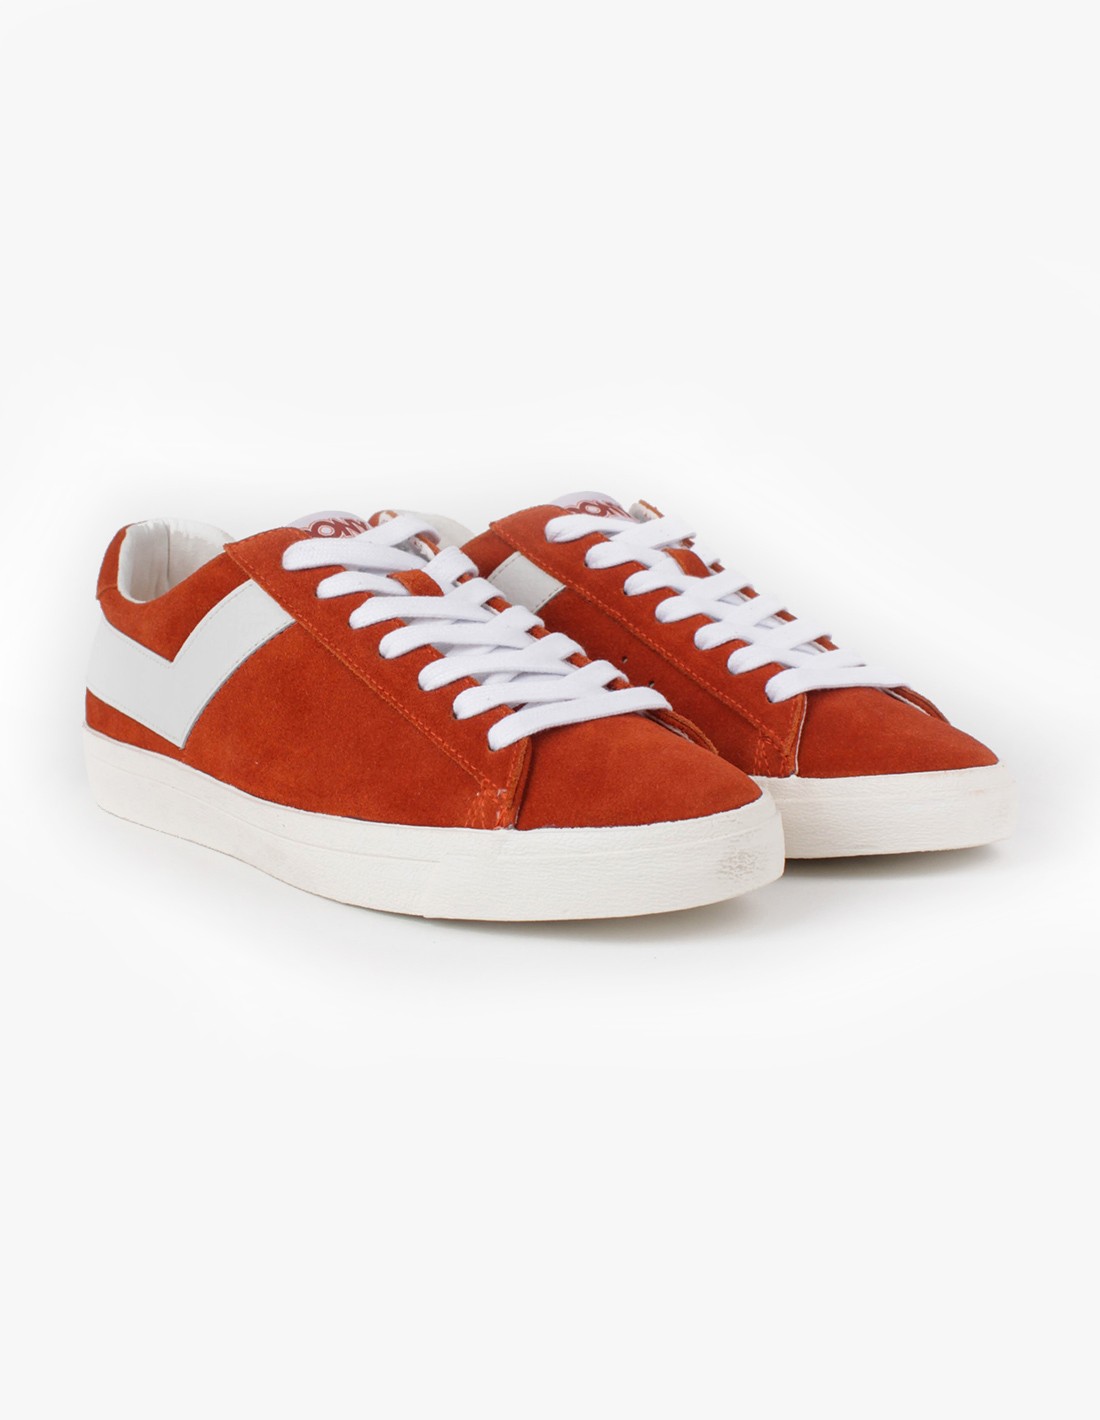 PONY Topstar Suede Ox in Burnt Ocre